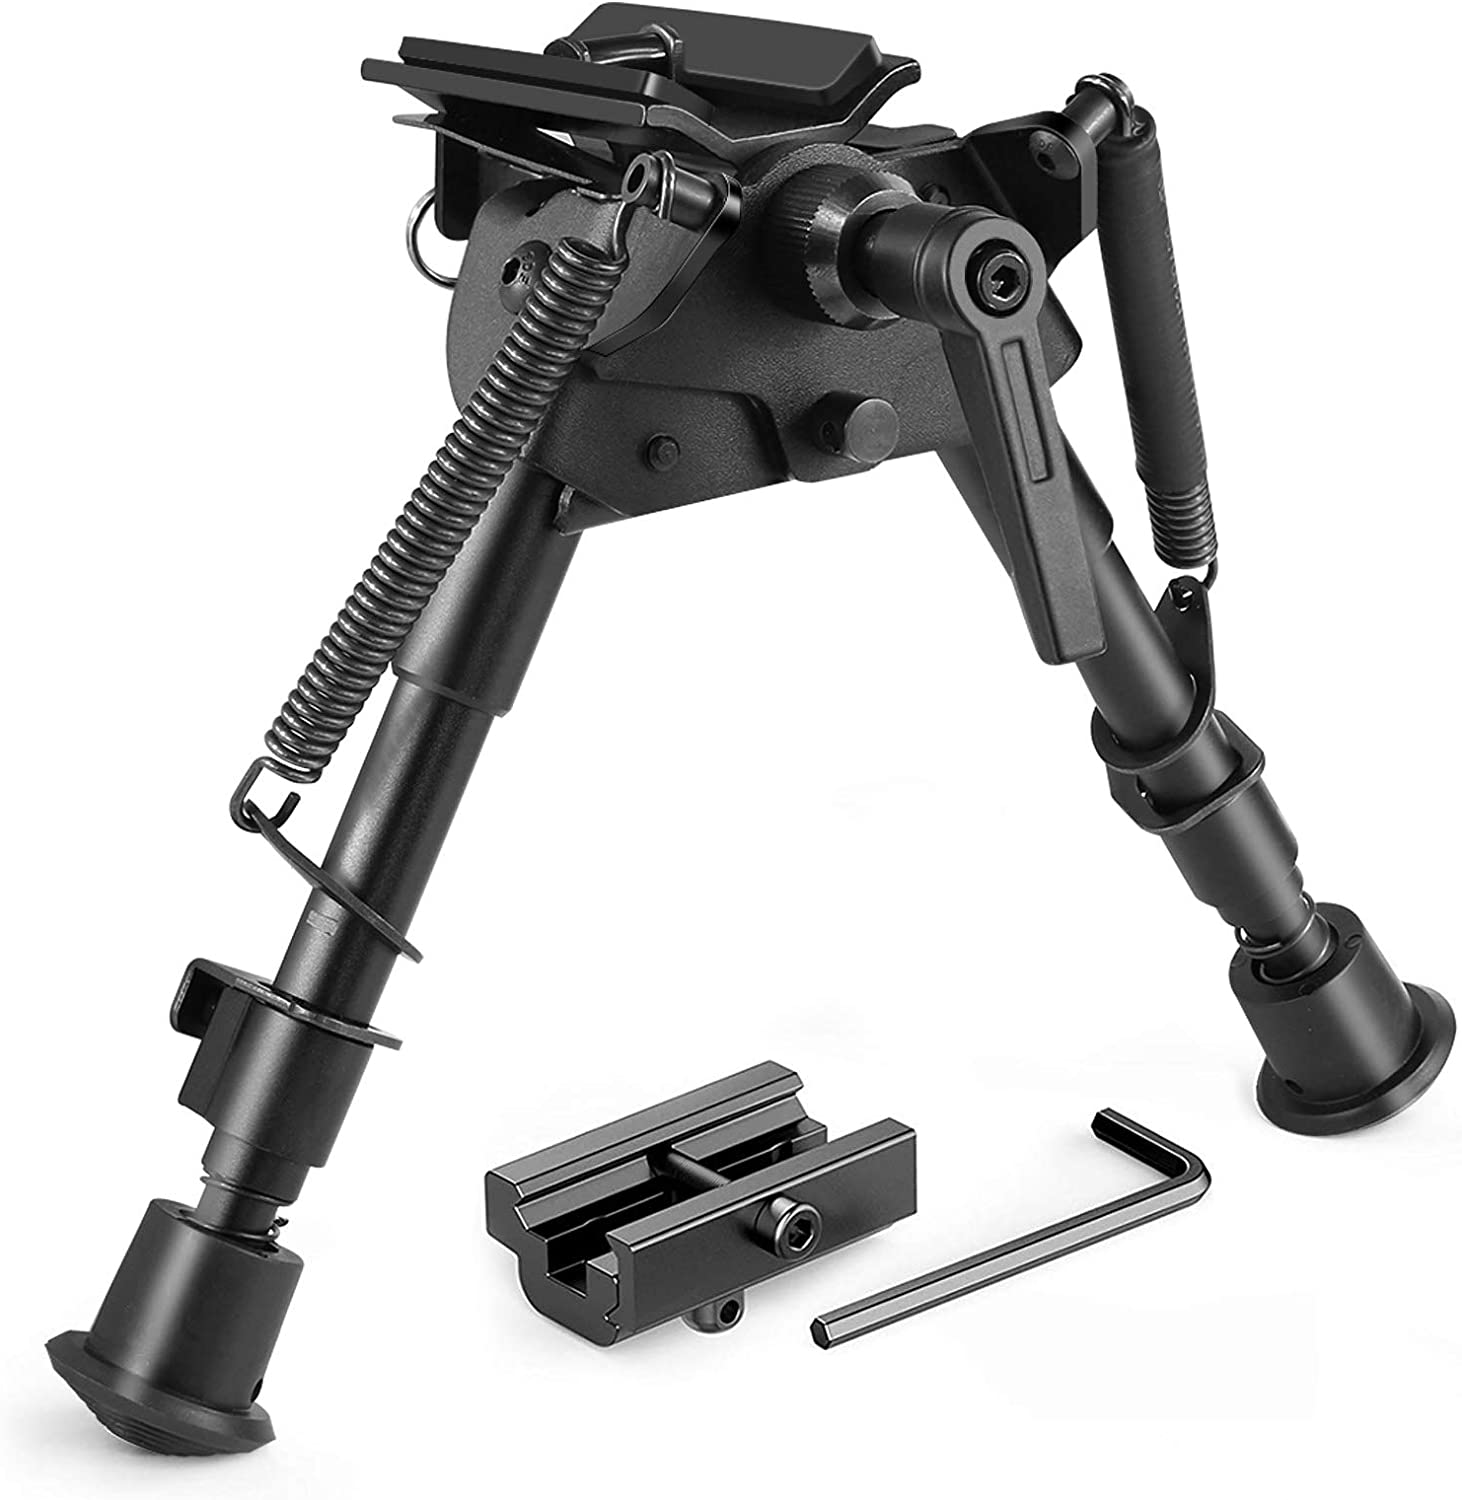 Twod Rifle Bipod 6-9 Inch Adjustable Spring Return Picatinny & Swivel-Stud Sniper Hunting Bipod with Mount Adapter